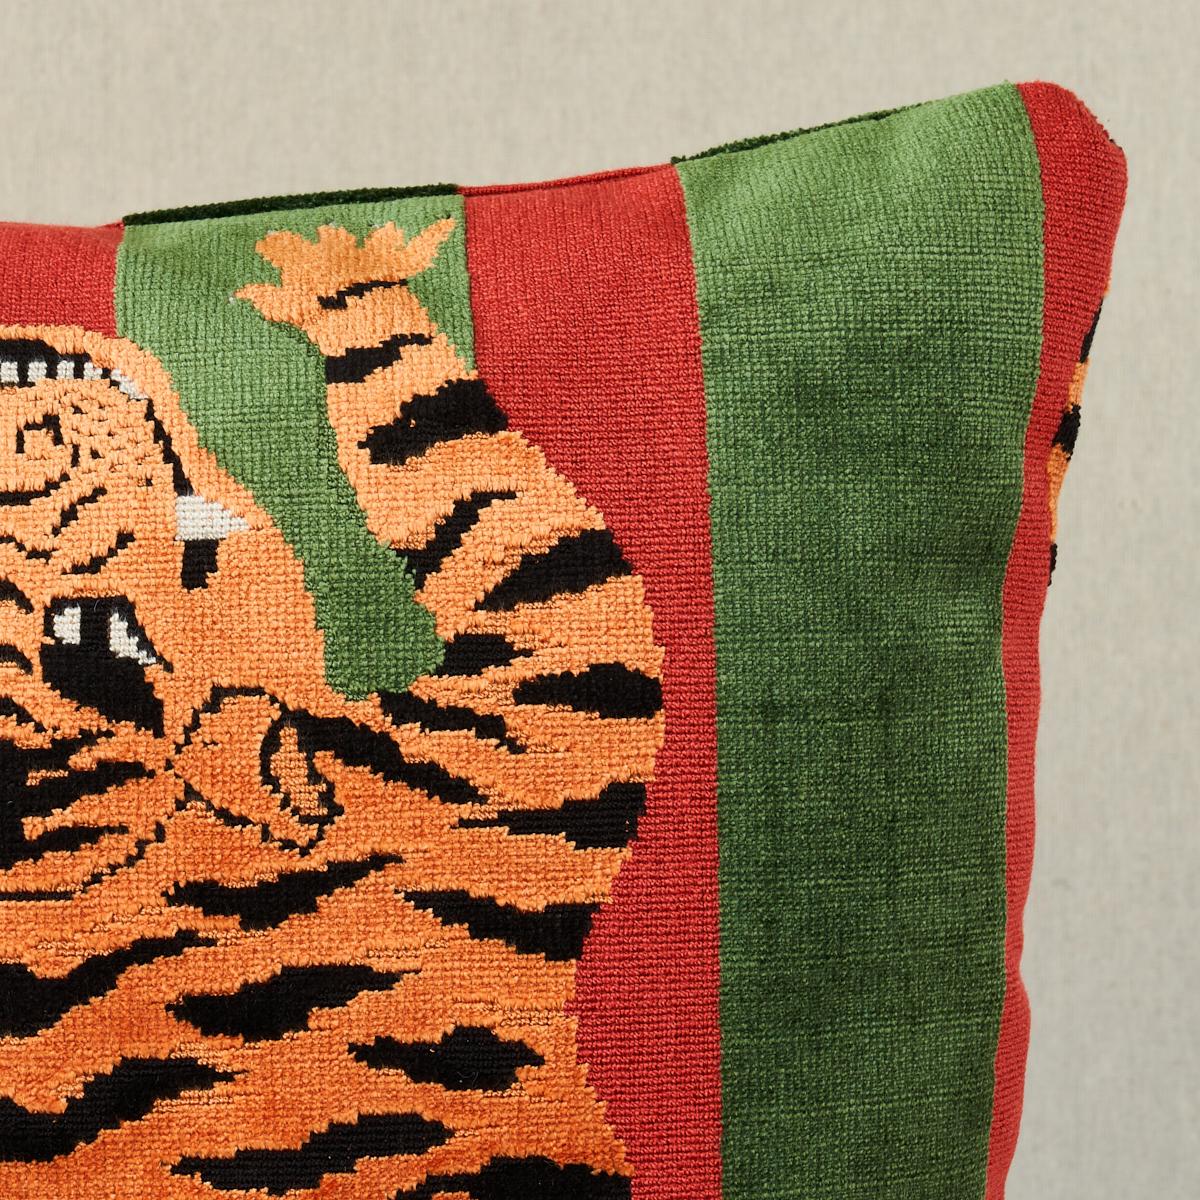 This pillow features Jokhang Tiger Velvet by Johnson Hartig/Libertine for Schumacher with a knife edge finish. Designed by Johnson Hartig, the Tibetan tiger motif is recast as a multi-dimensional stripe on a lush velvet that can easily work in a